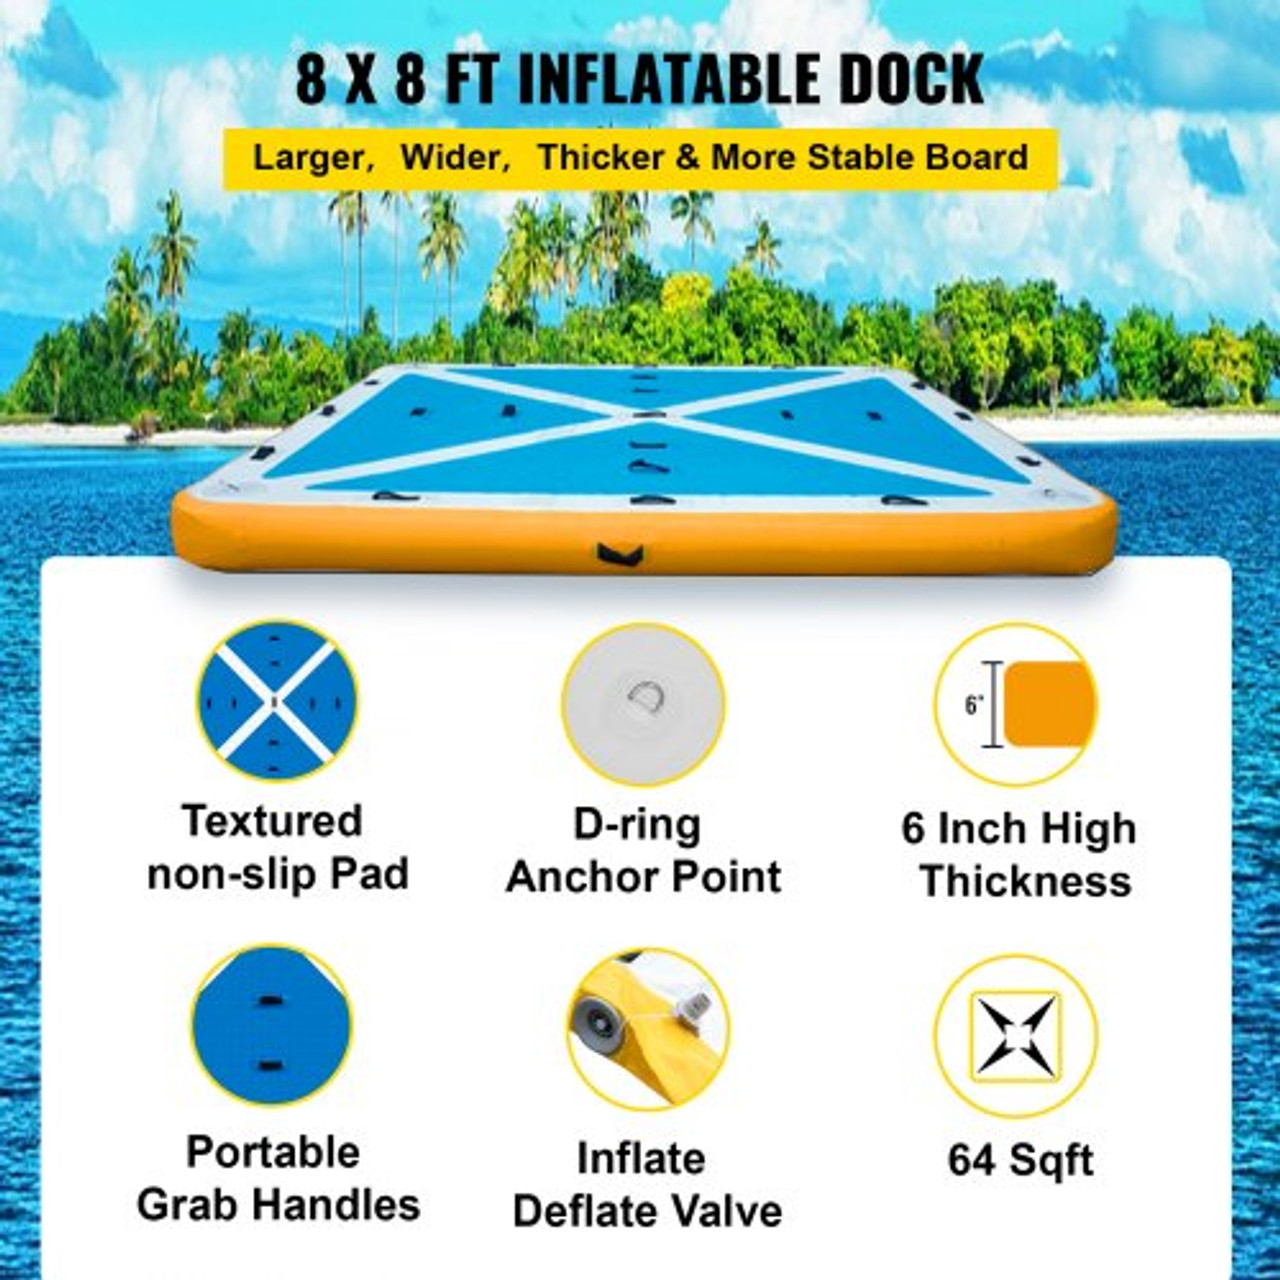 Inflatable Floating Dock 8 x 8 ft, Inflatable Dock Platform with Electric Air Pump, Inflatable Swim Platform 6 Inch Thick, Floating Dock 5-6 People, Floating Platform for Pool Beach Ocean